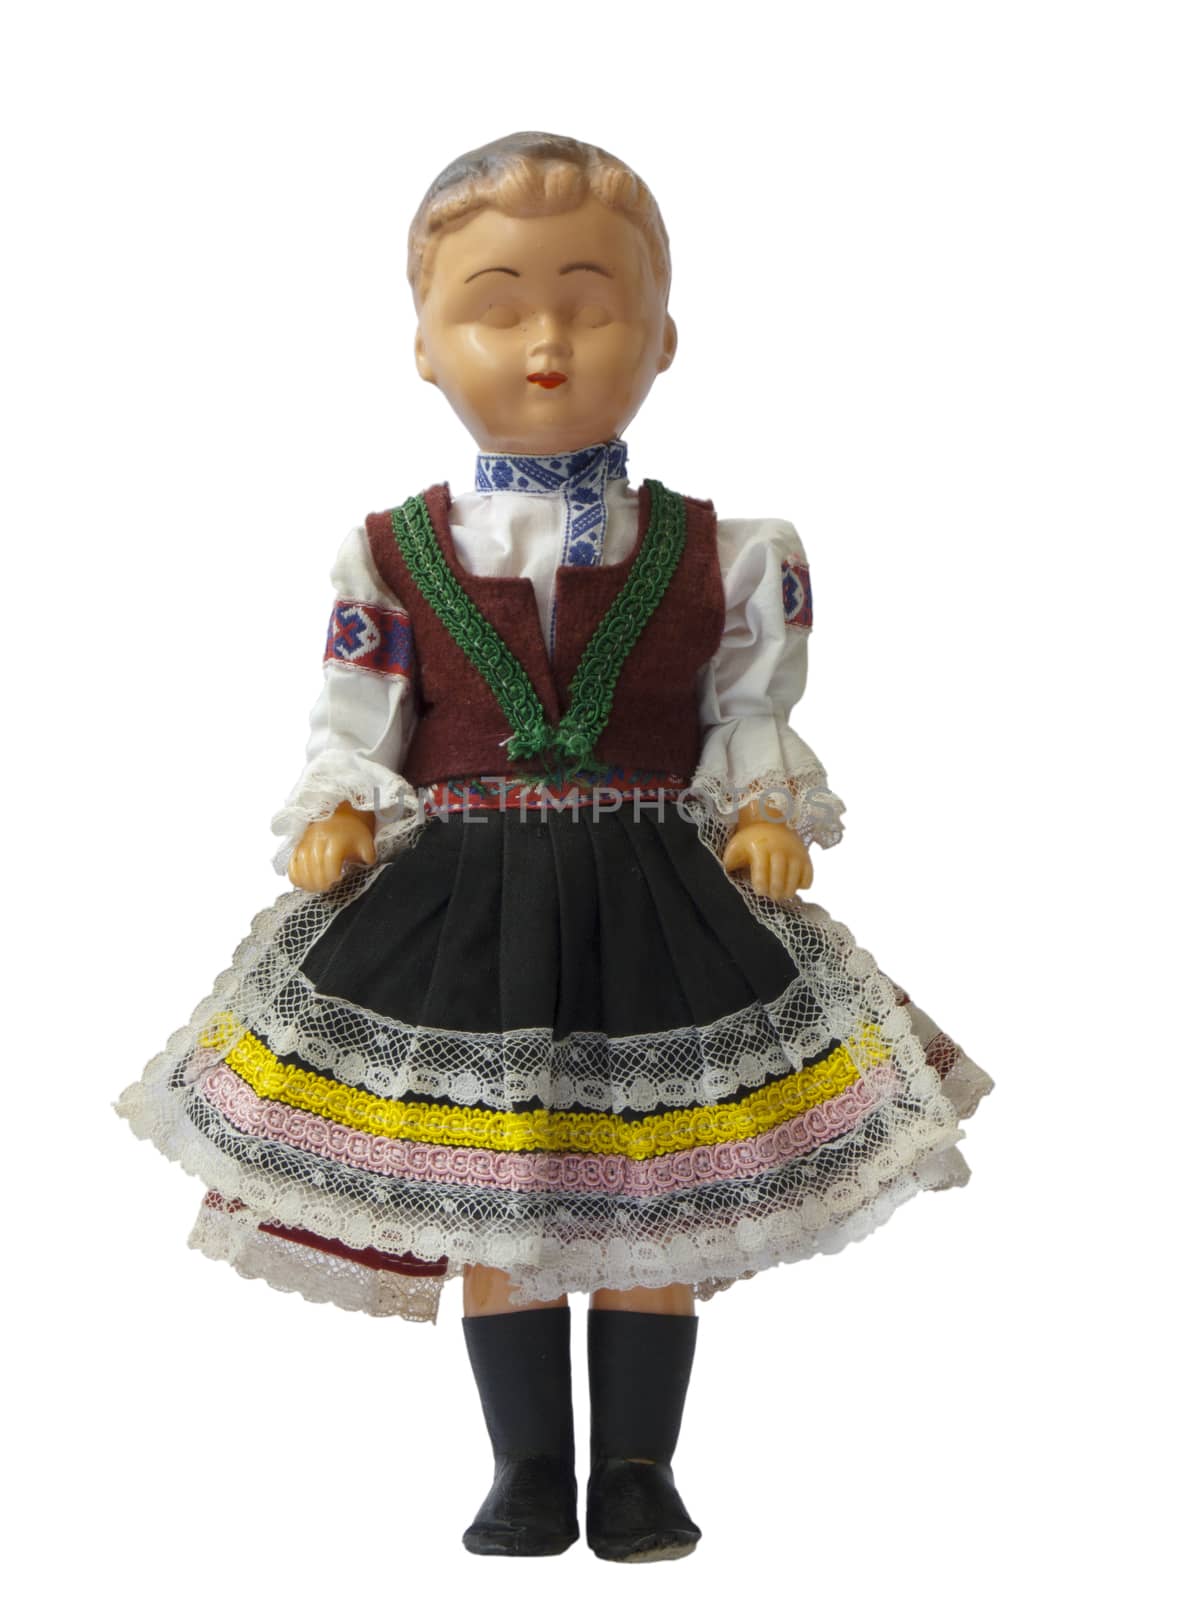 A doll dressed in handmade costumes from Central Europe